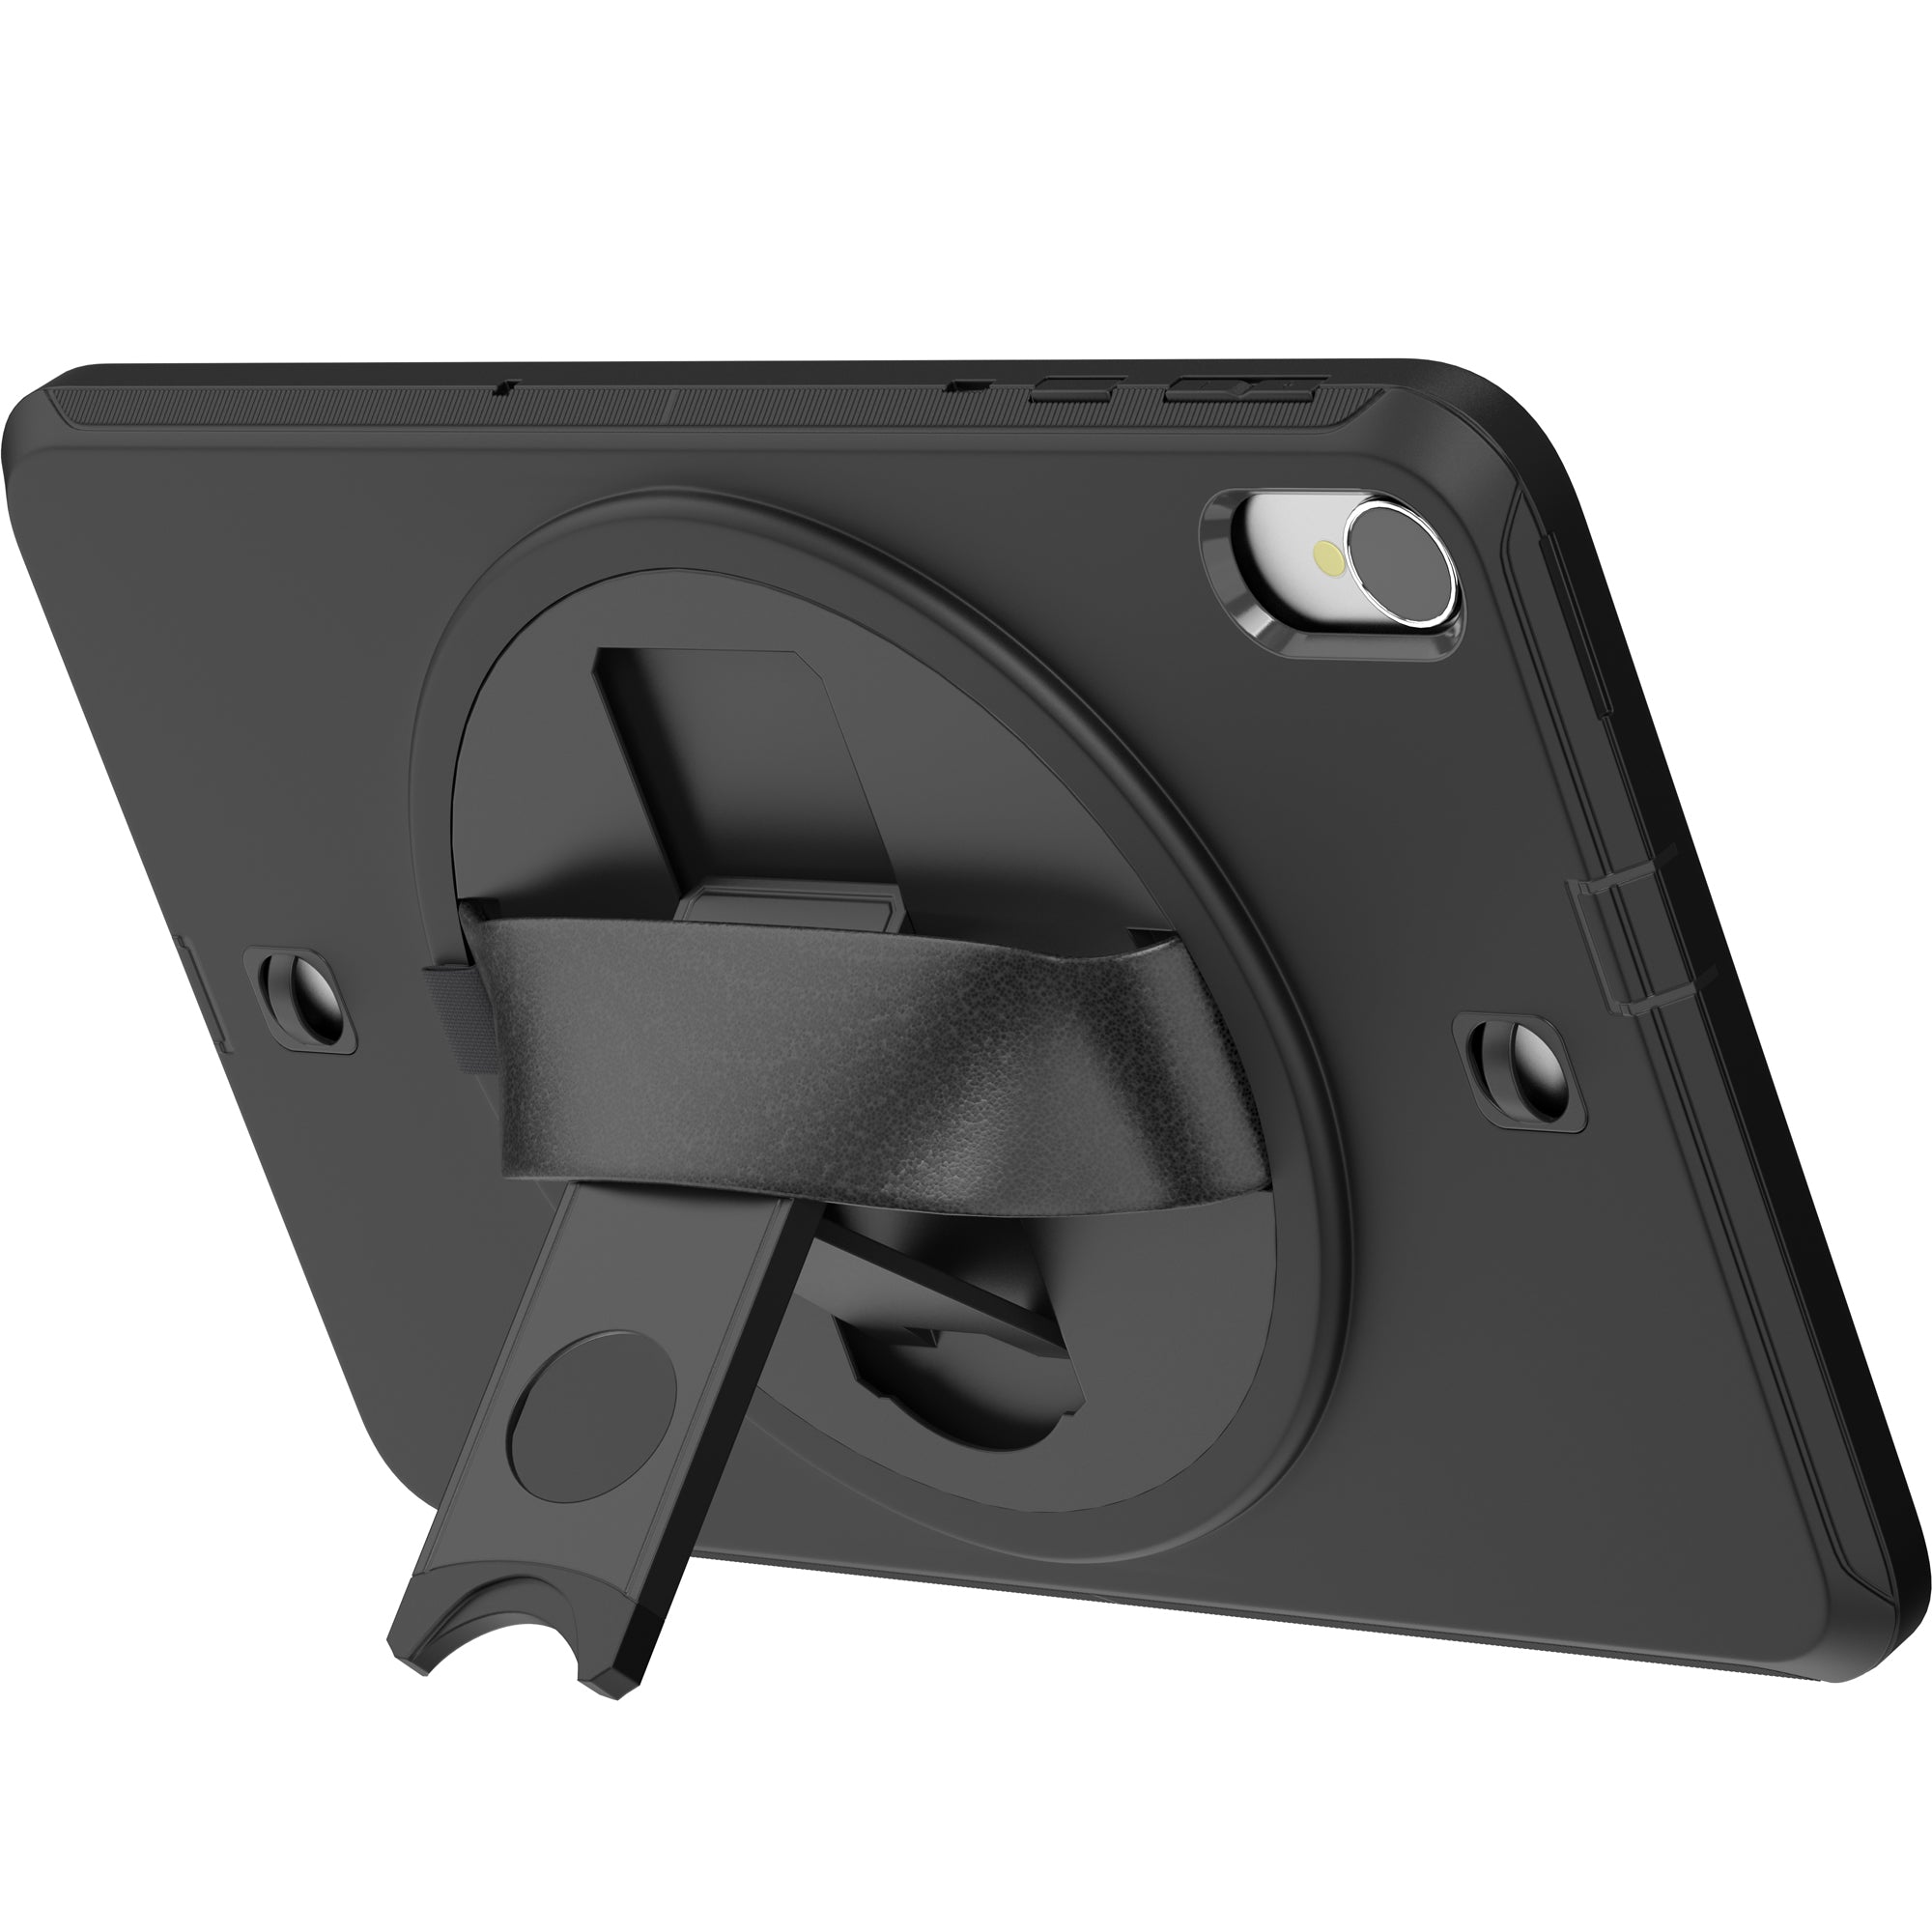 Protective Case with Built-in 360° Rotatable Grip Kickstand for Lenovo K10